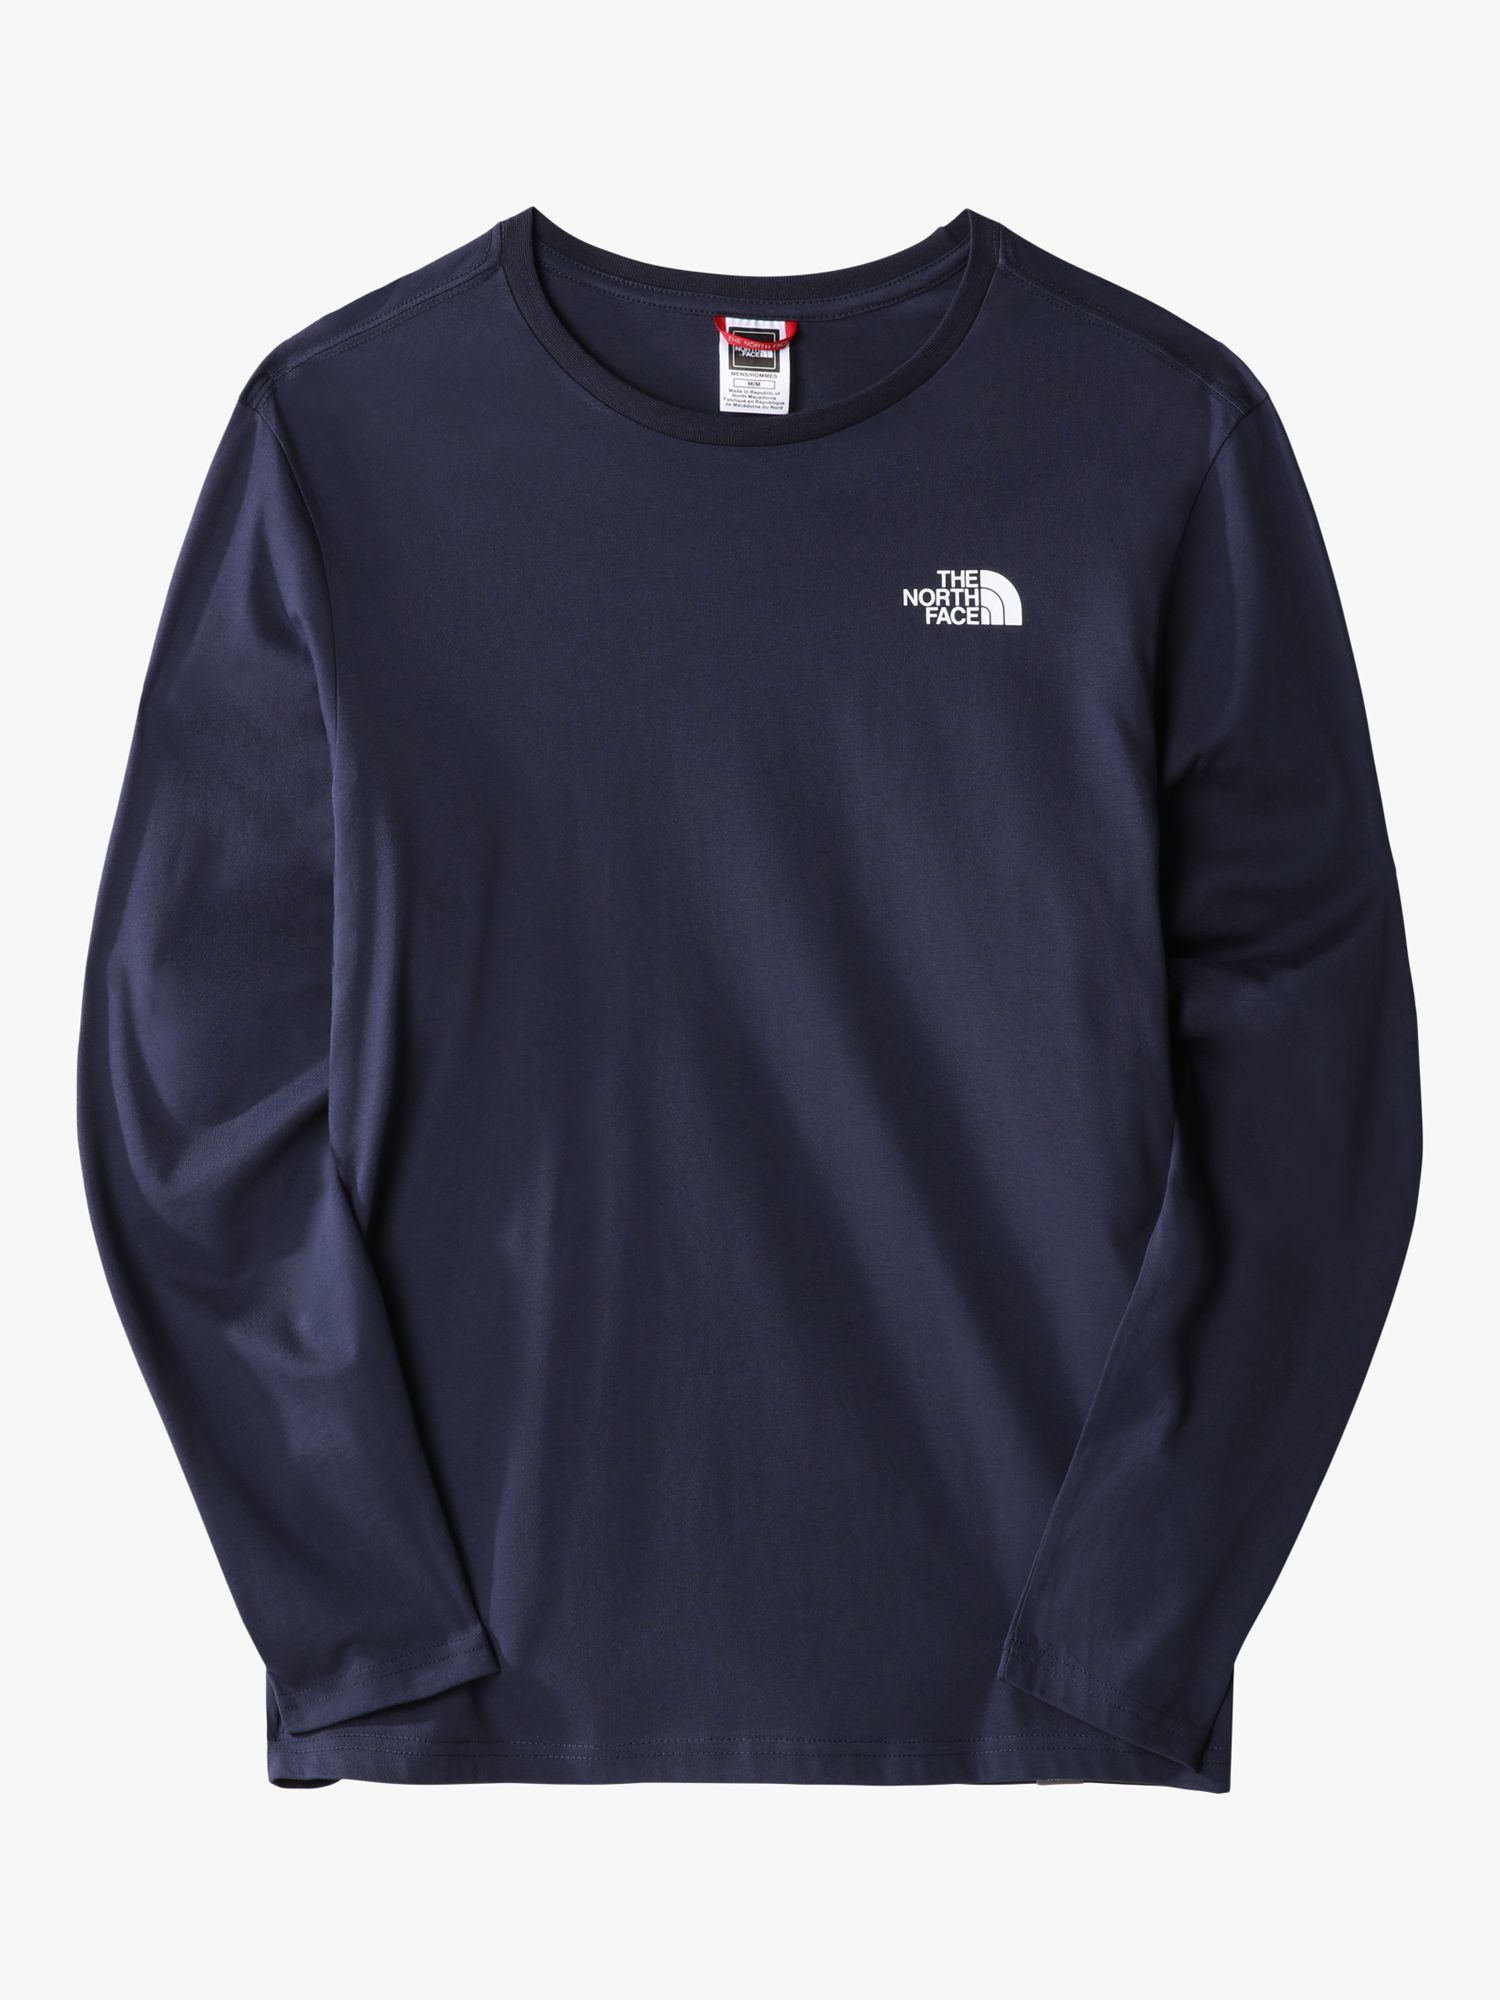 The North Face Easy Sleeve & T-Shirt, Lewis Summit at Navy Partners Long John